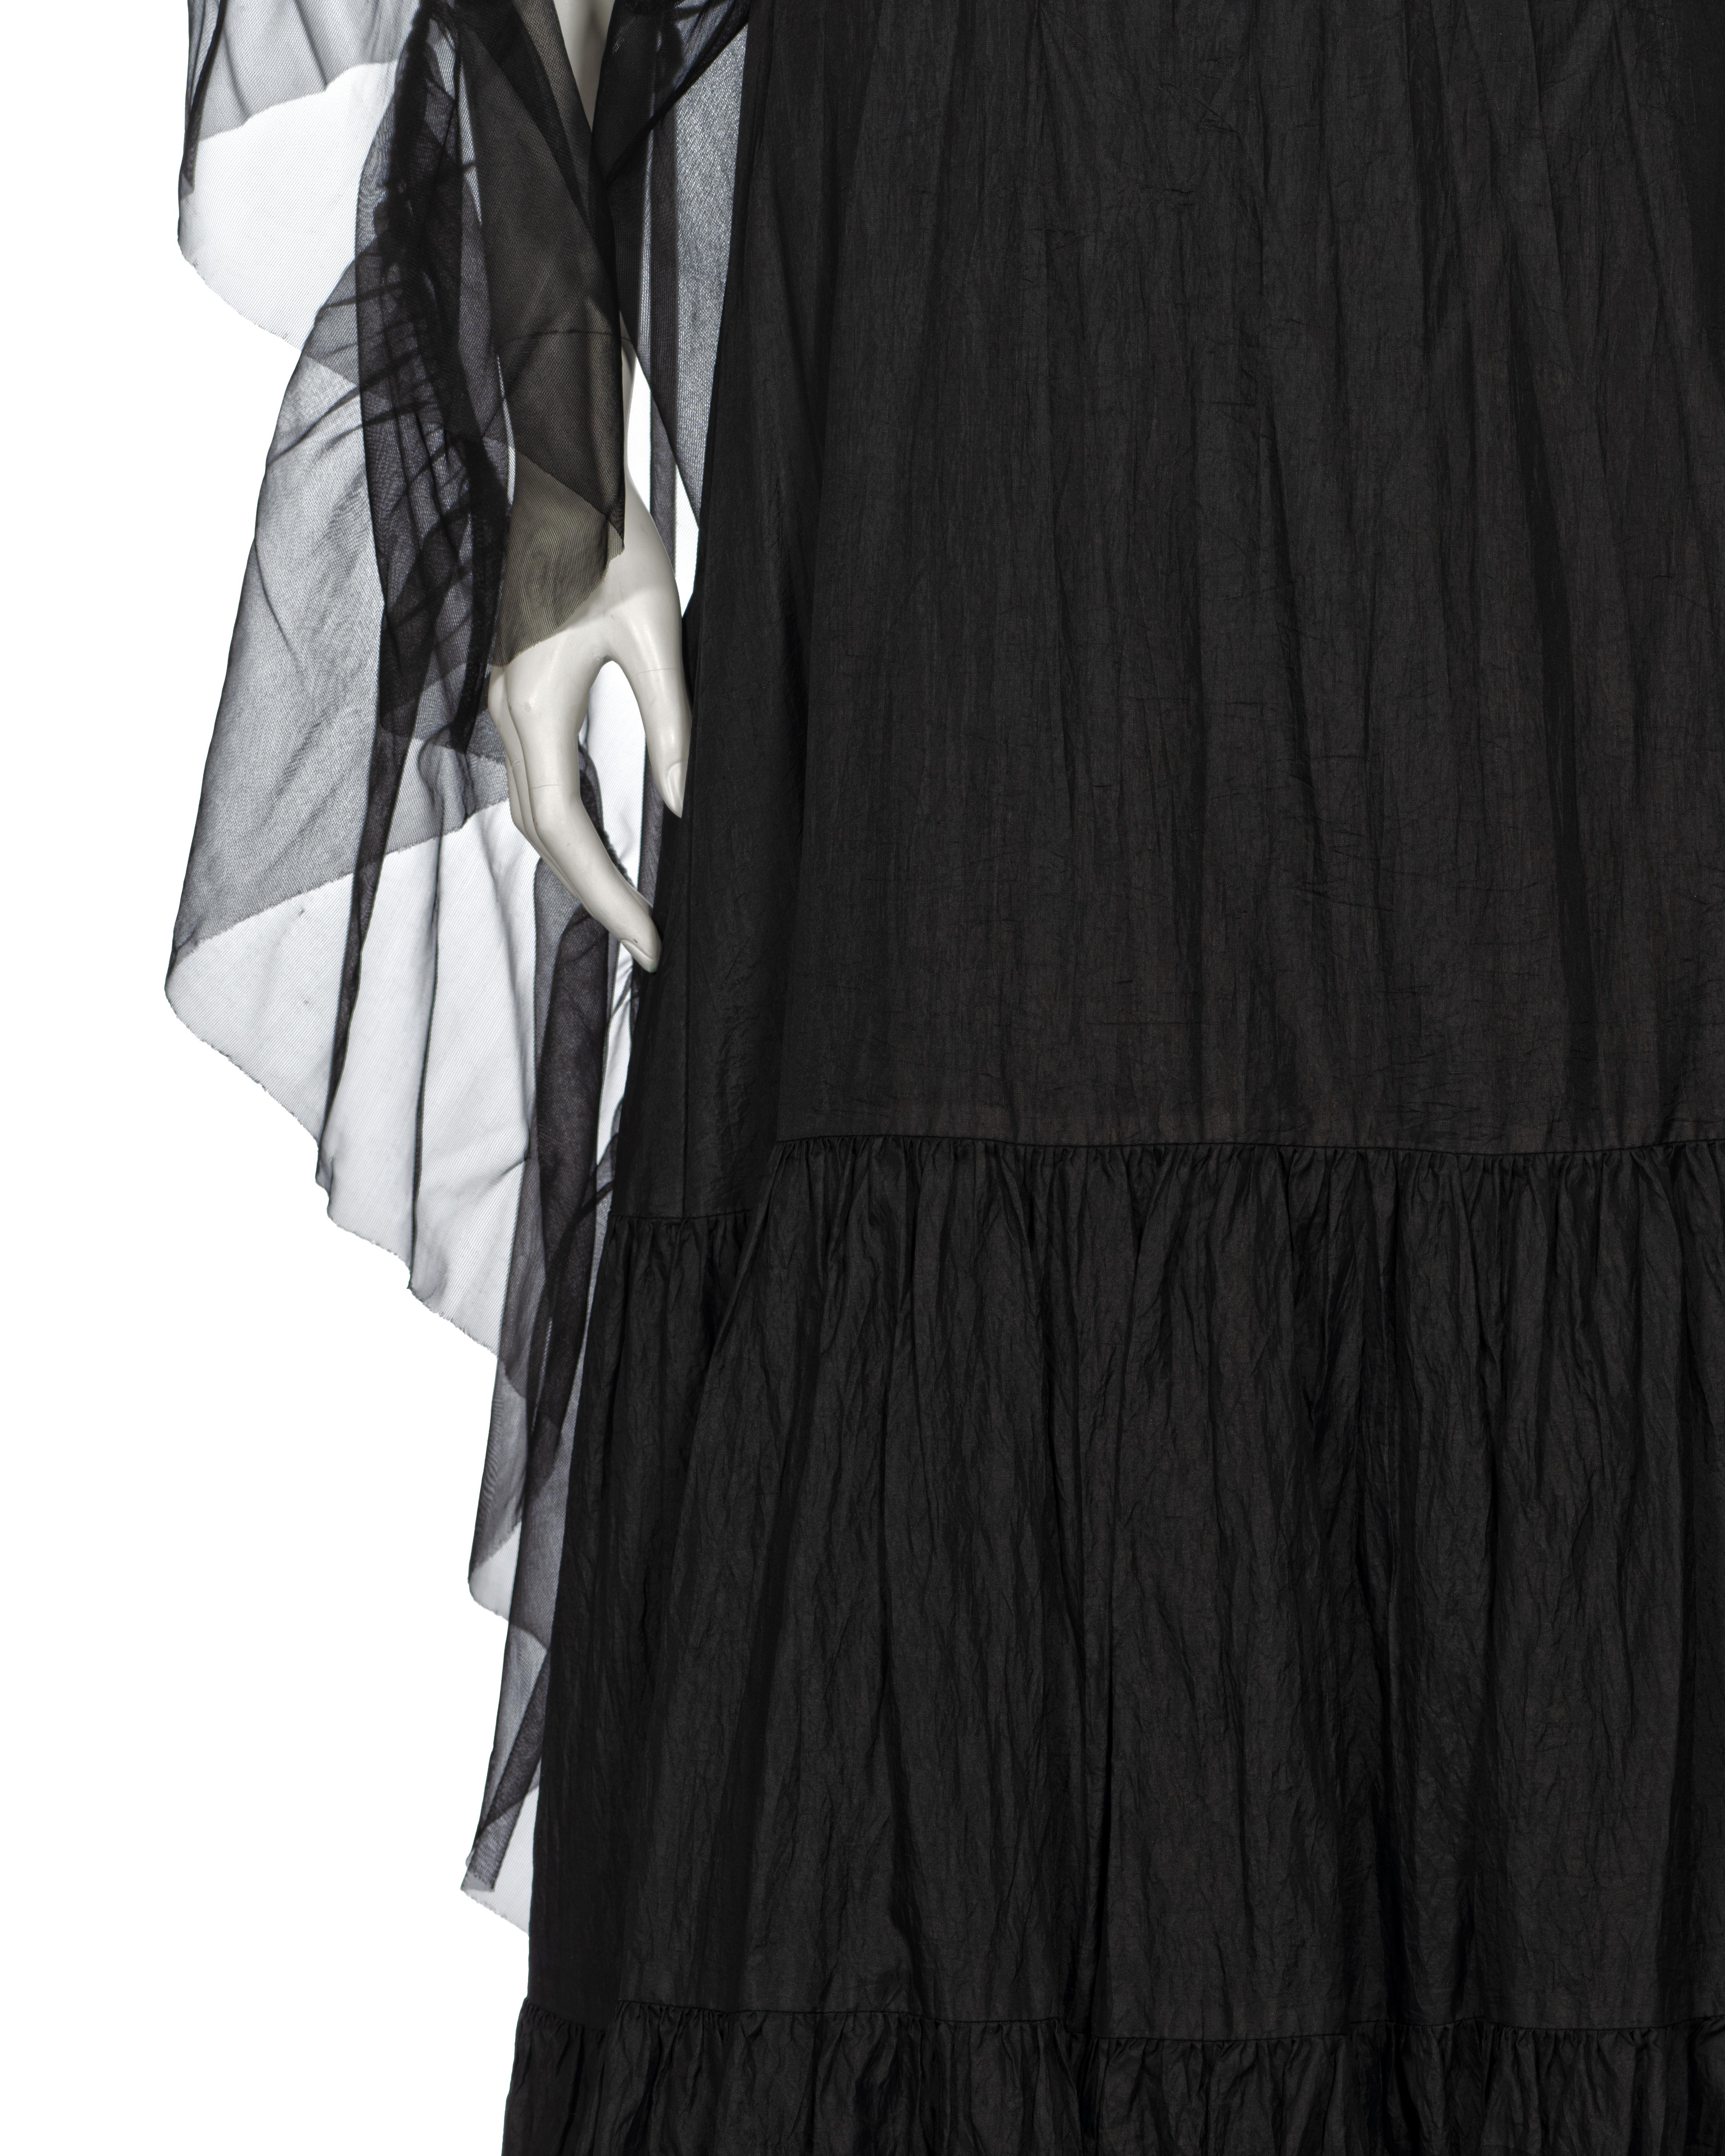 Martin Margiela Artisanal Evening Dress Made Out Of Vintage Petticoats, ss 2003 For Sale 9